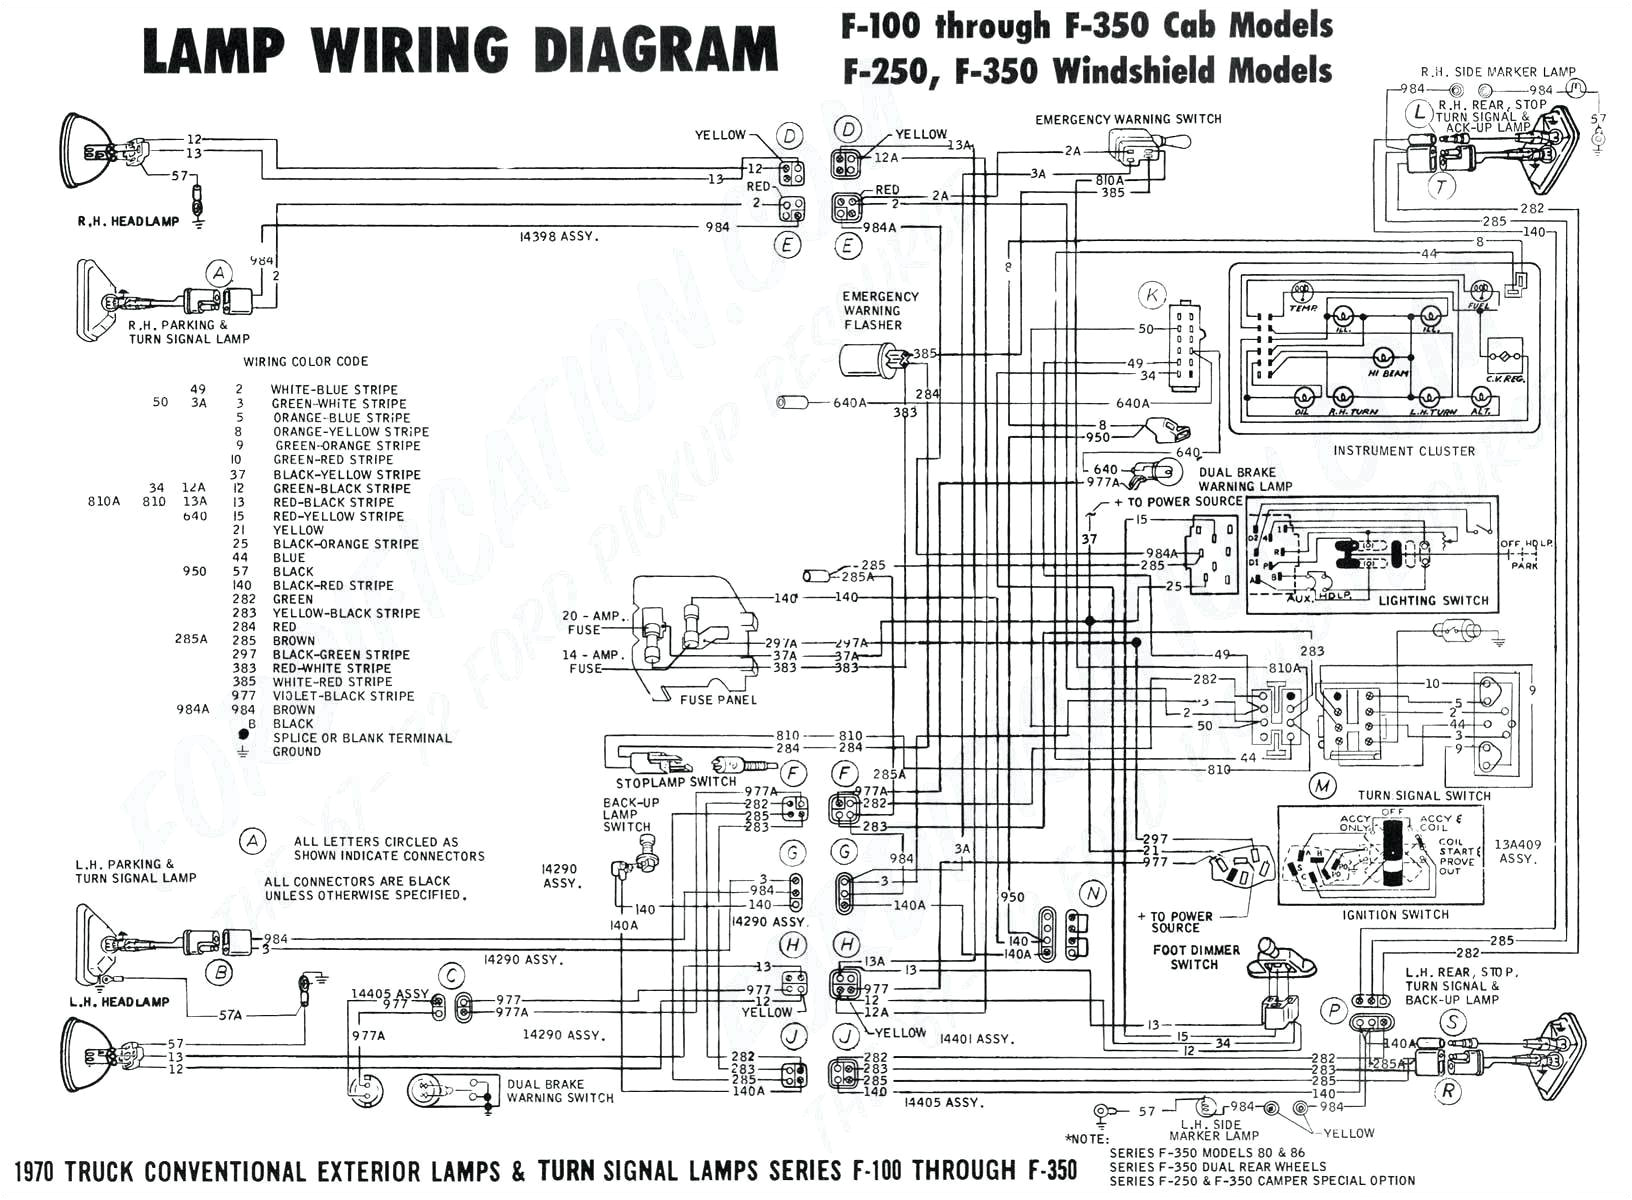 350z wire harness routing wiring diagram name 350z engine harness diagram electrical schematic wiring diagram 350z